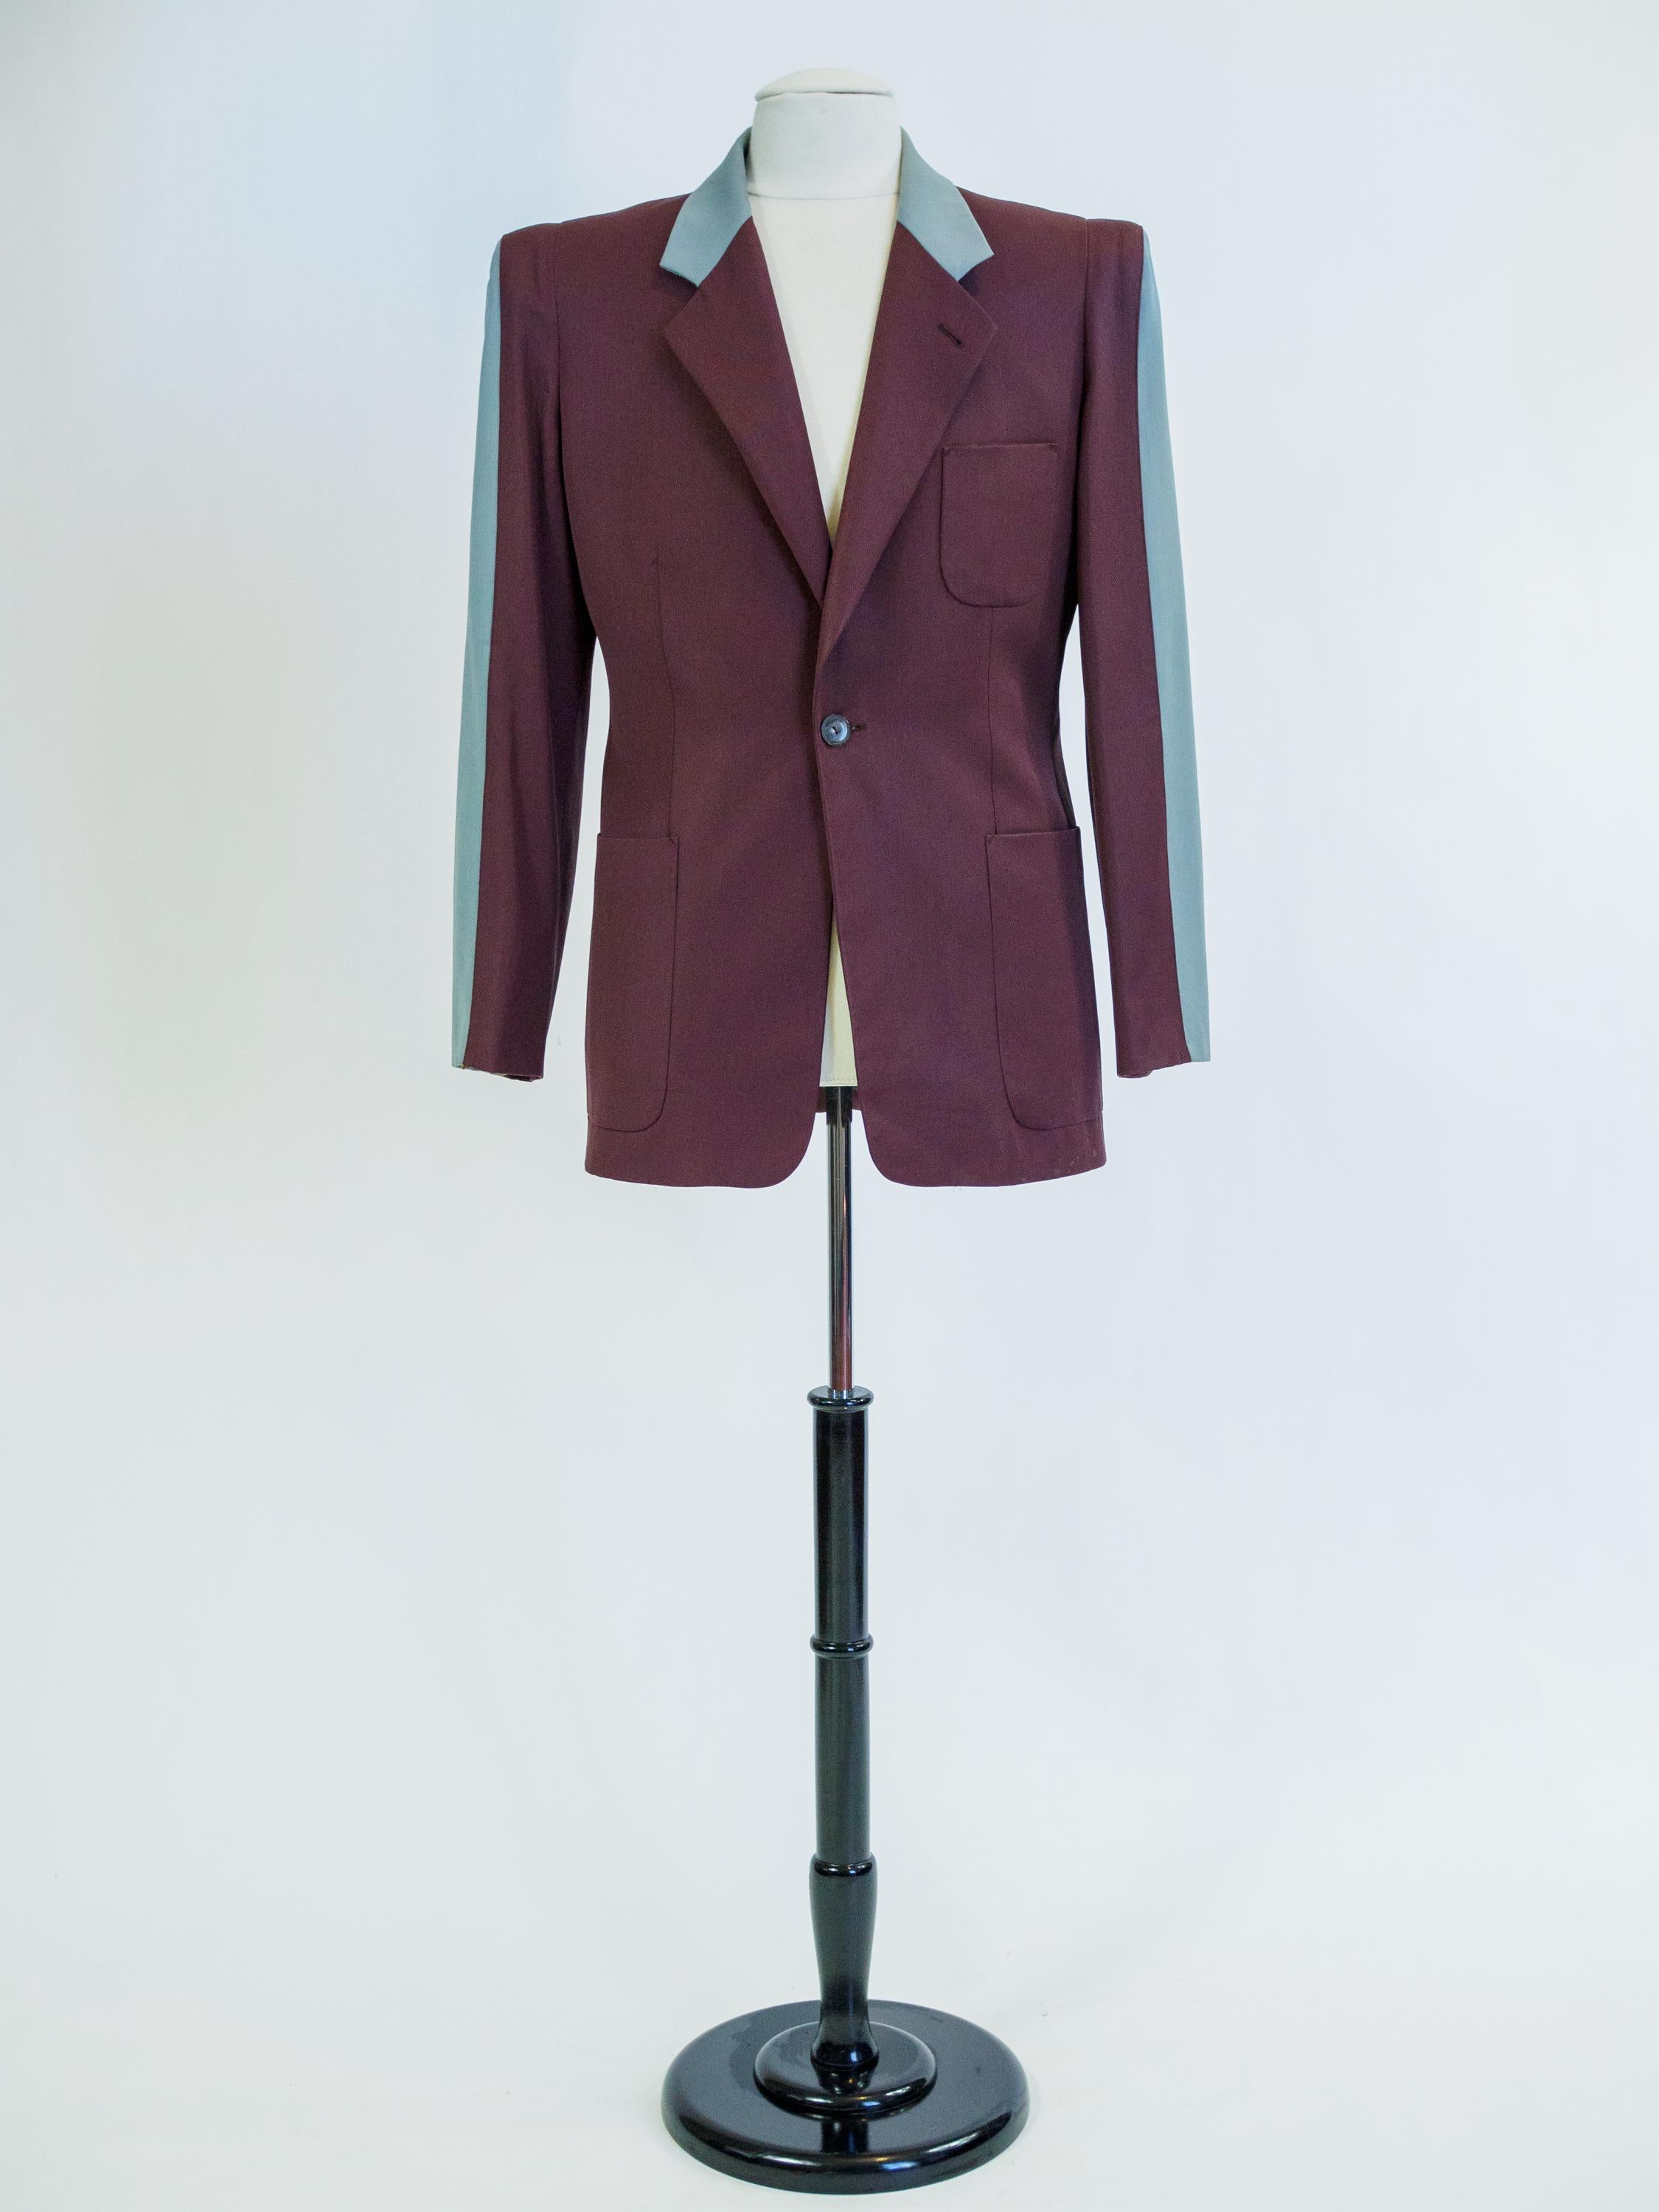 Jean-Paul Gaultier Jacket model 1057 with Cocteau-type effigy Circa 1995 For Sale 3